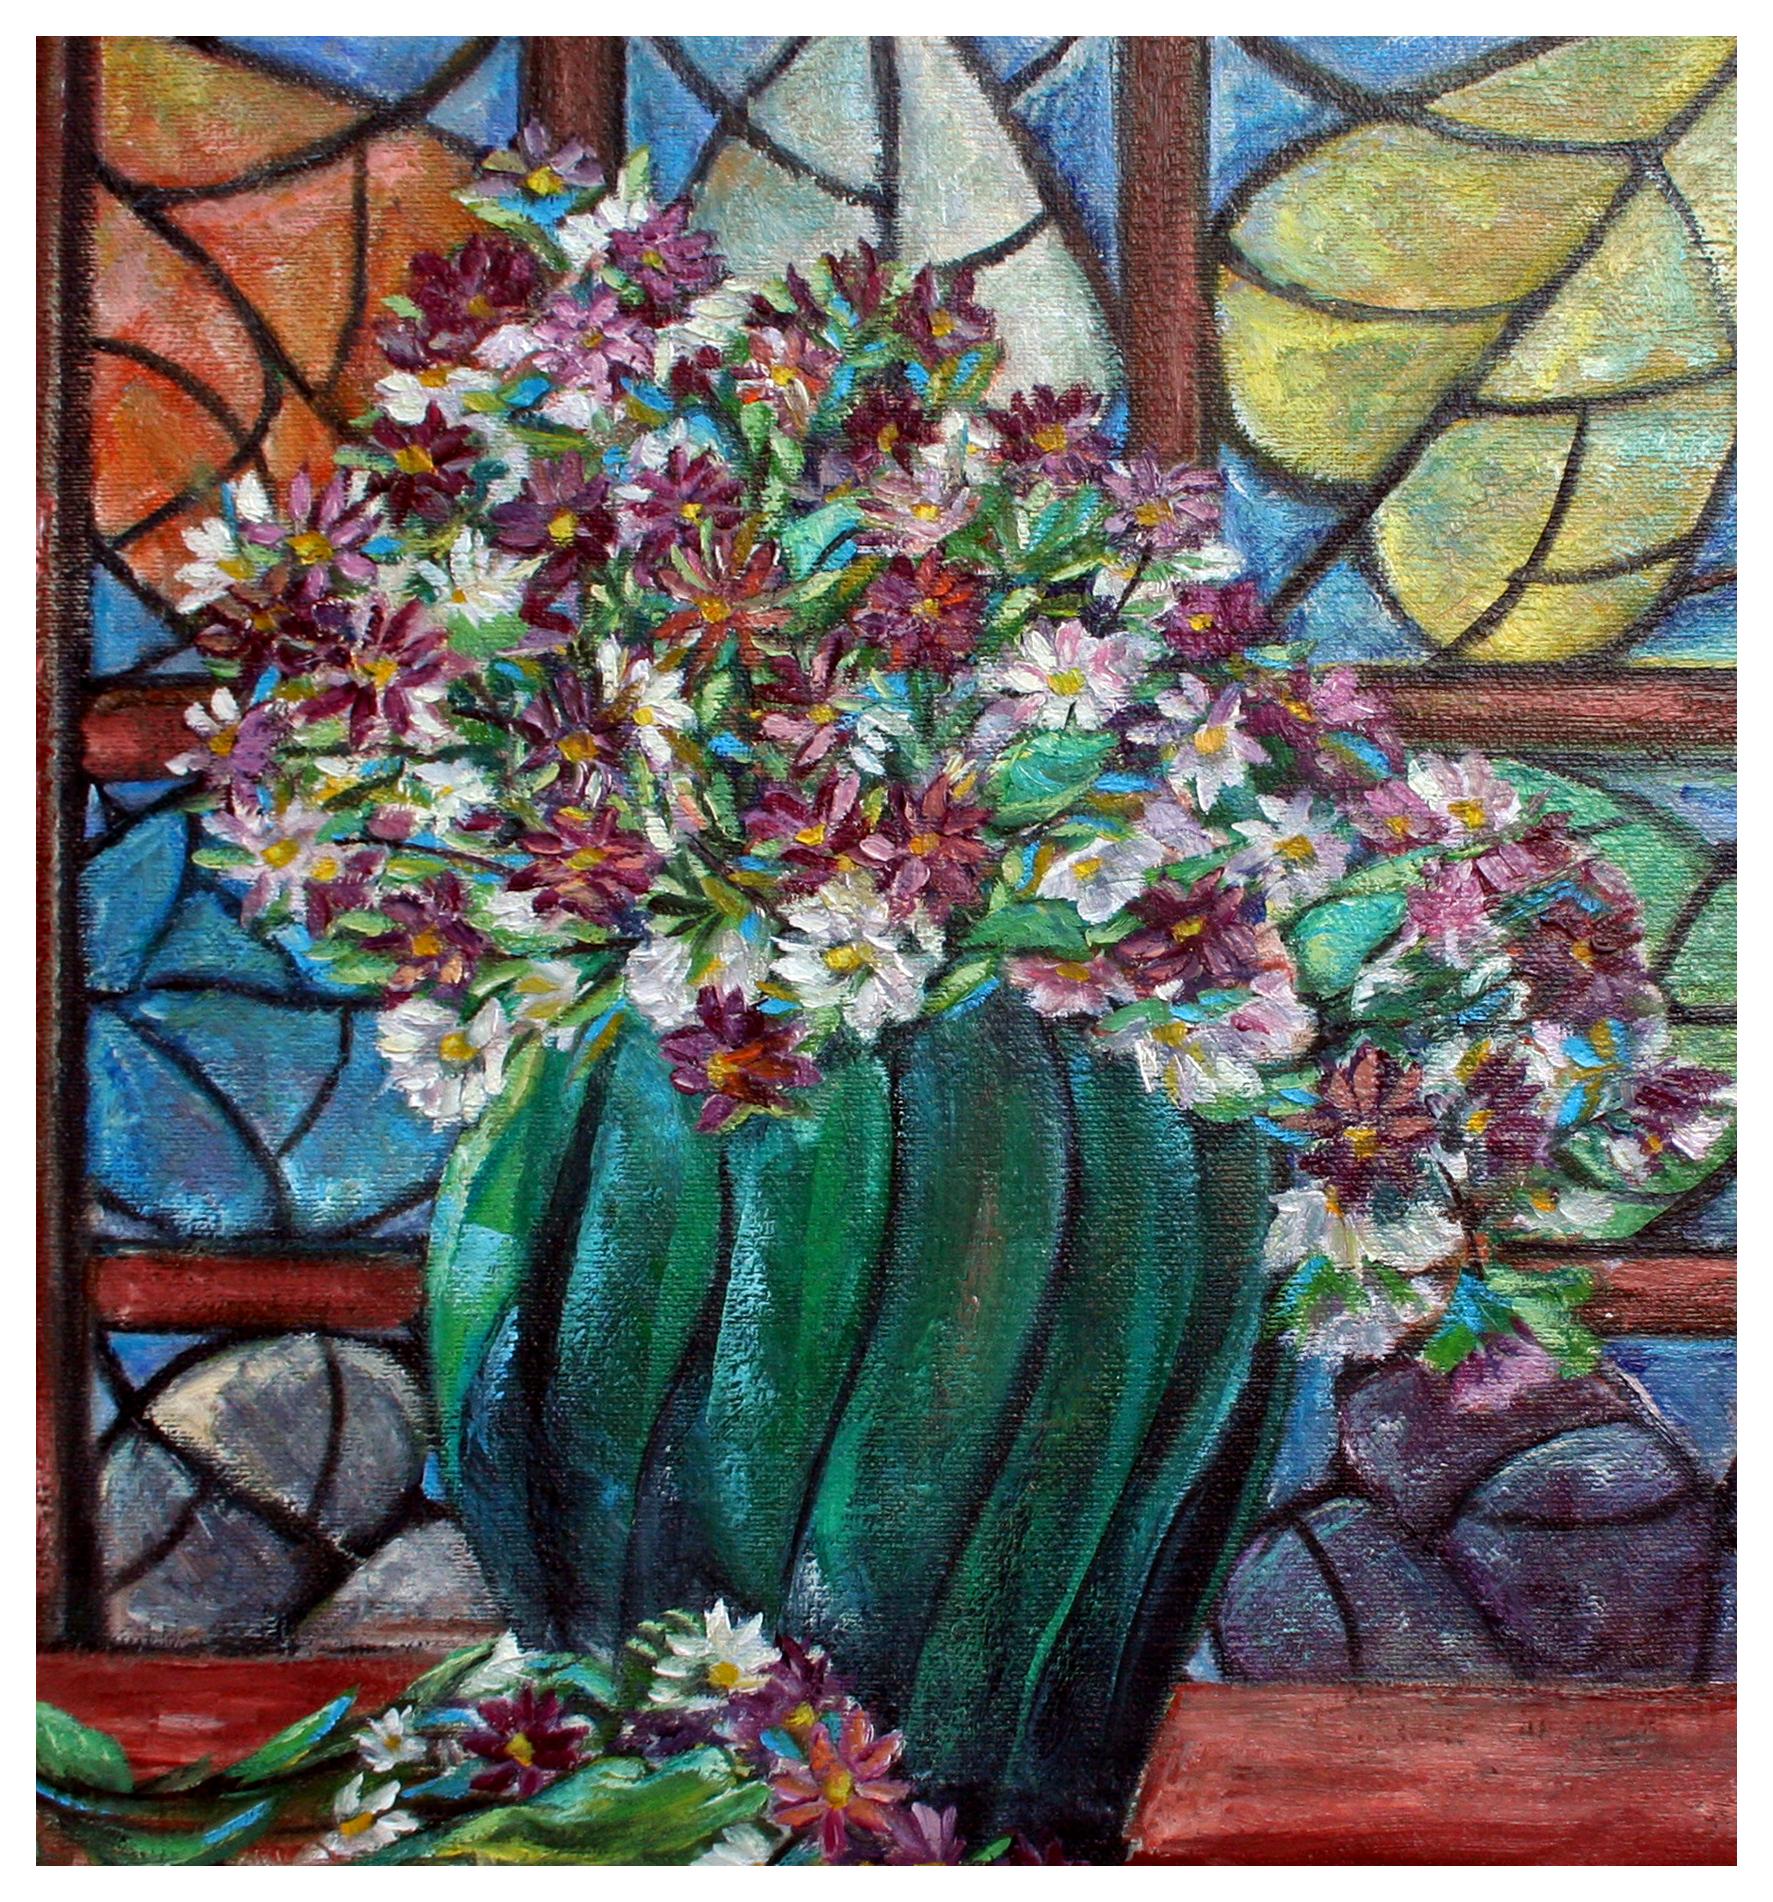 Arts & Crafts Style Floral Still Life wit Stained Glass Window - Painting by Peggy Krusee